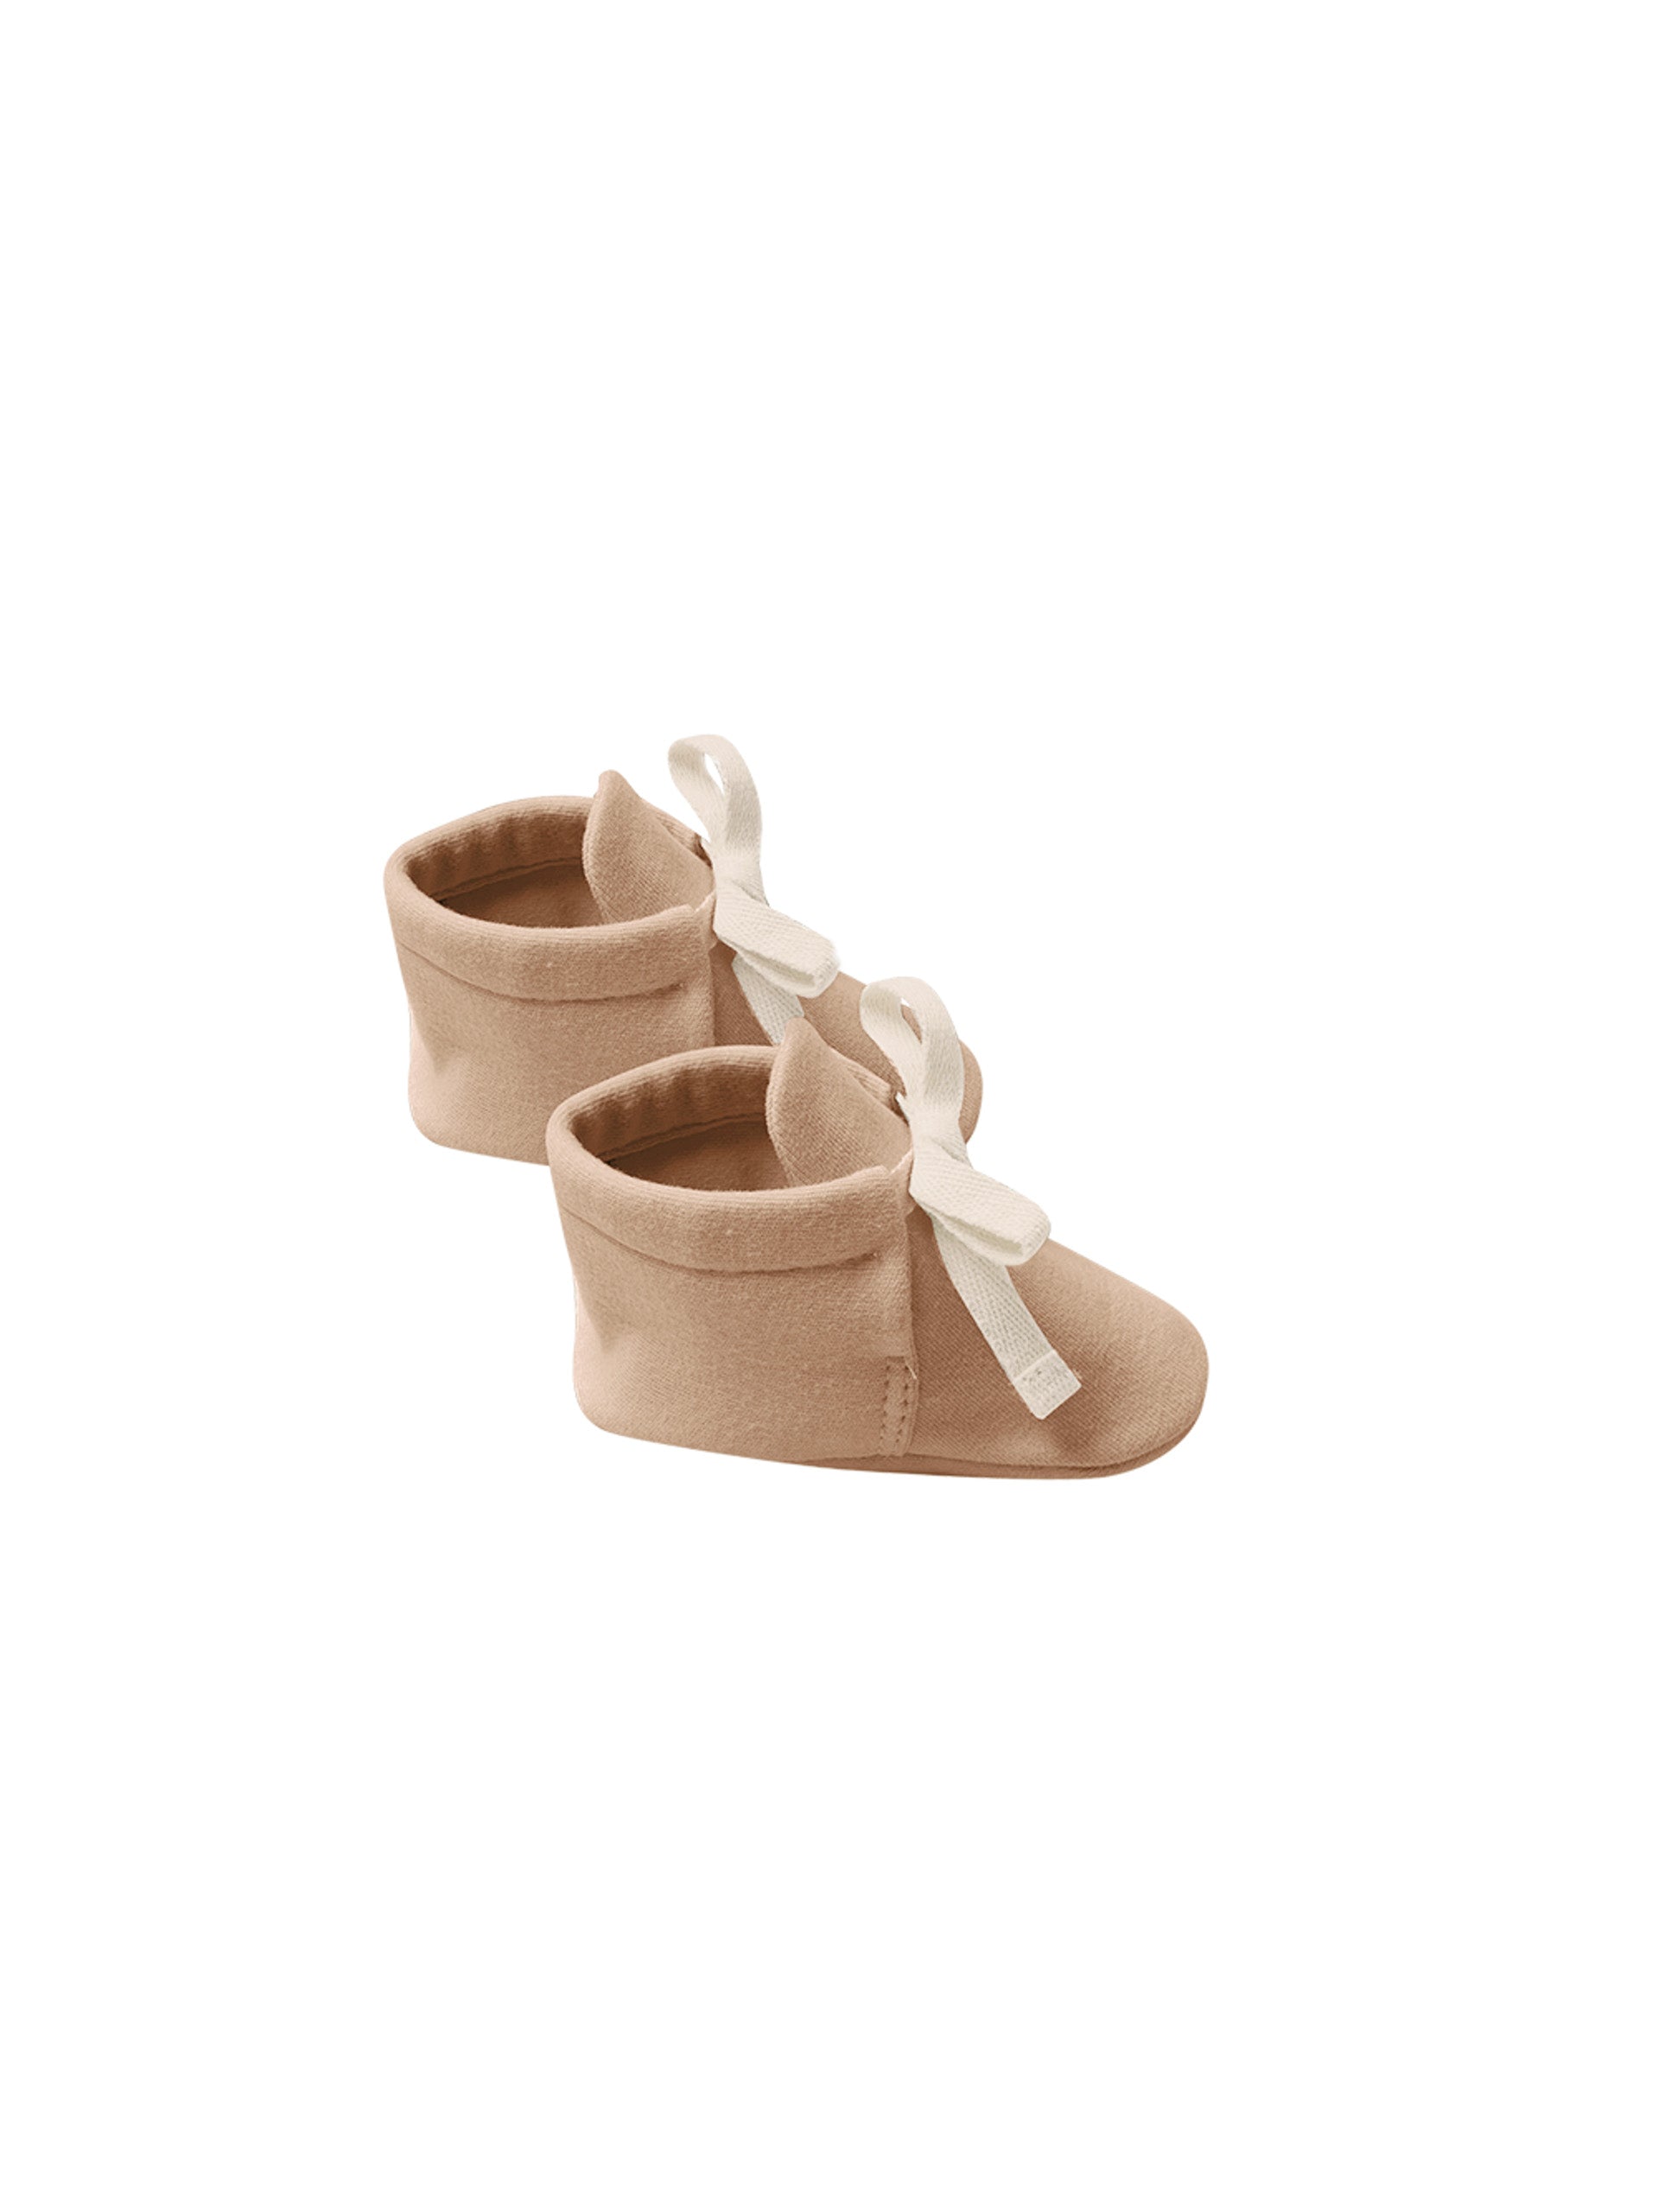 BABY BOOTIES | APRICOT - LAST ONE 0/3M